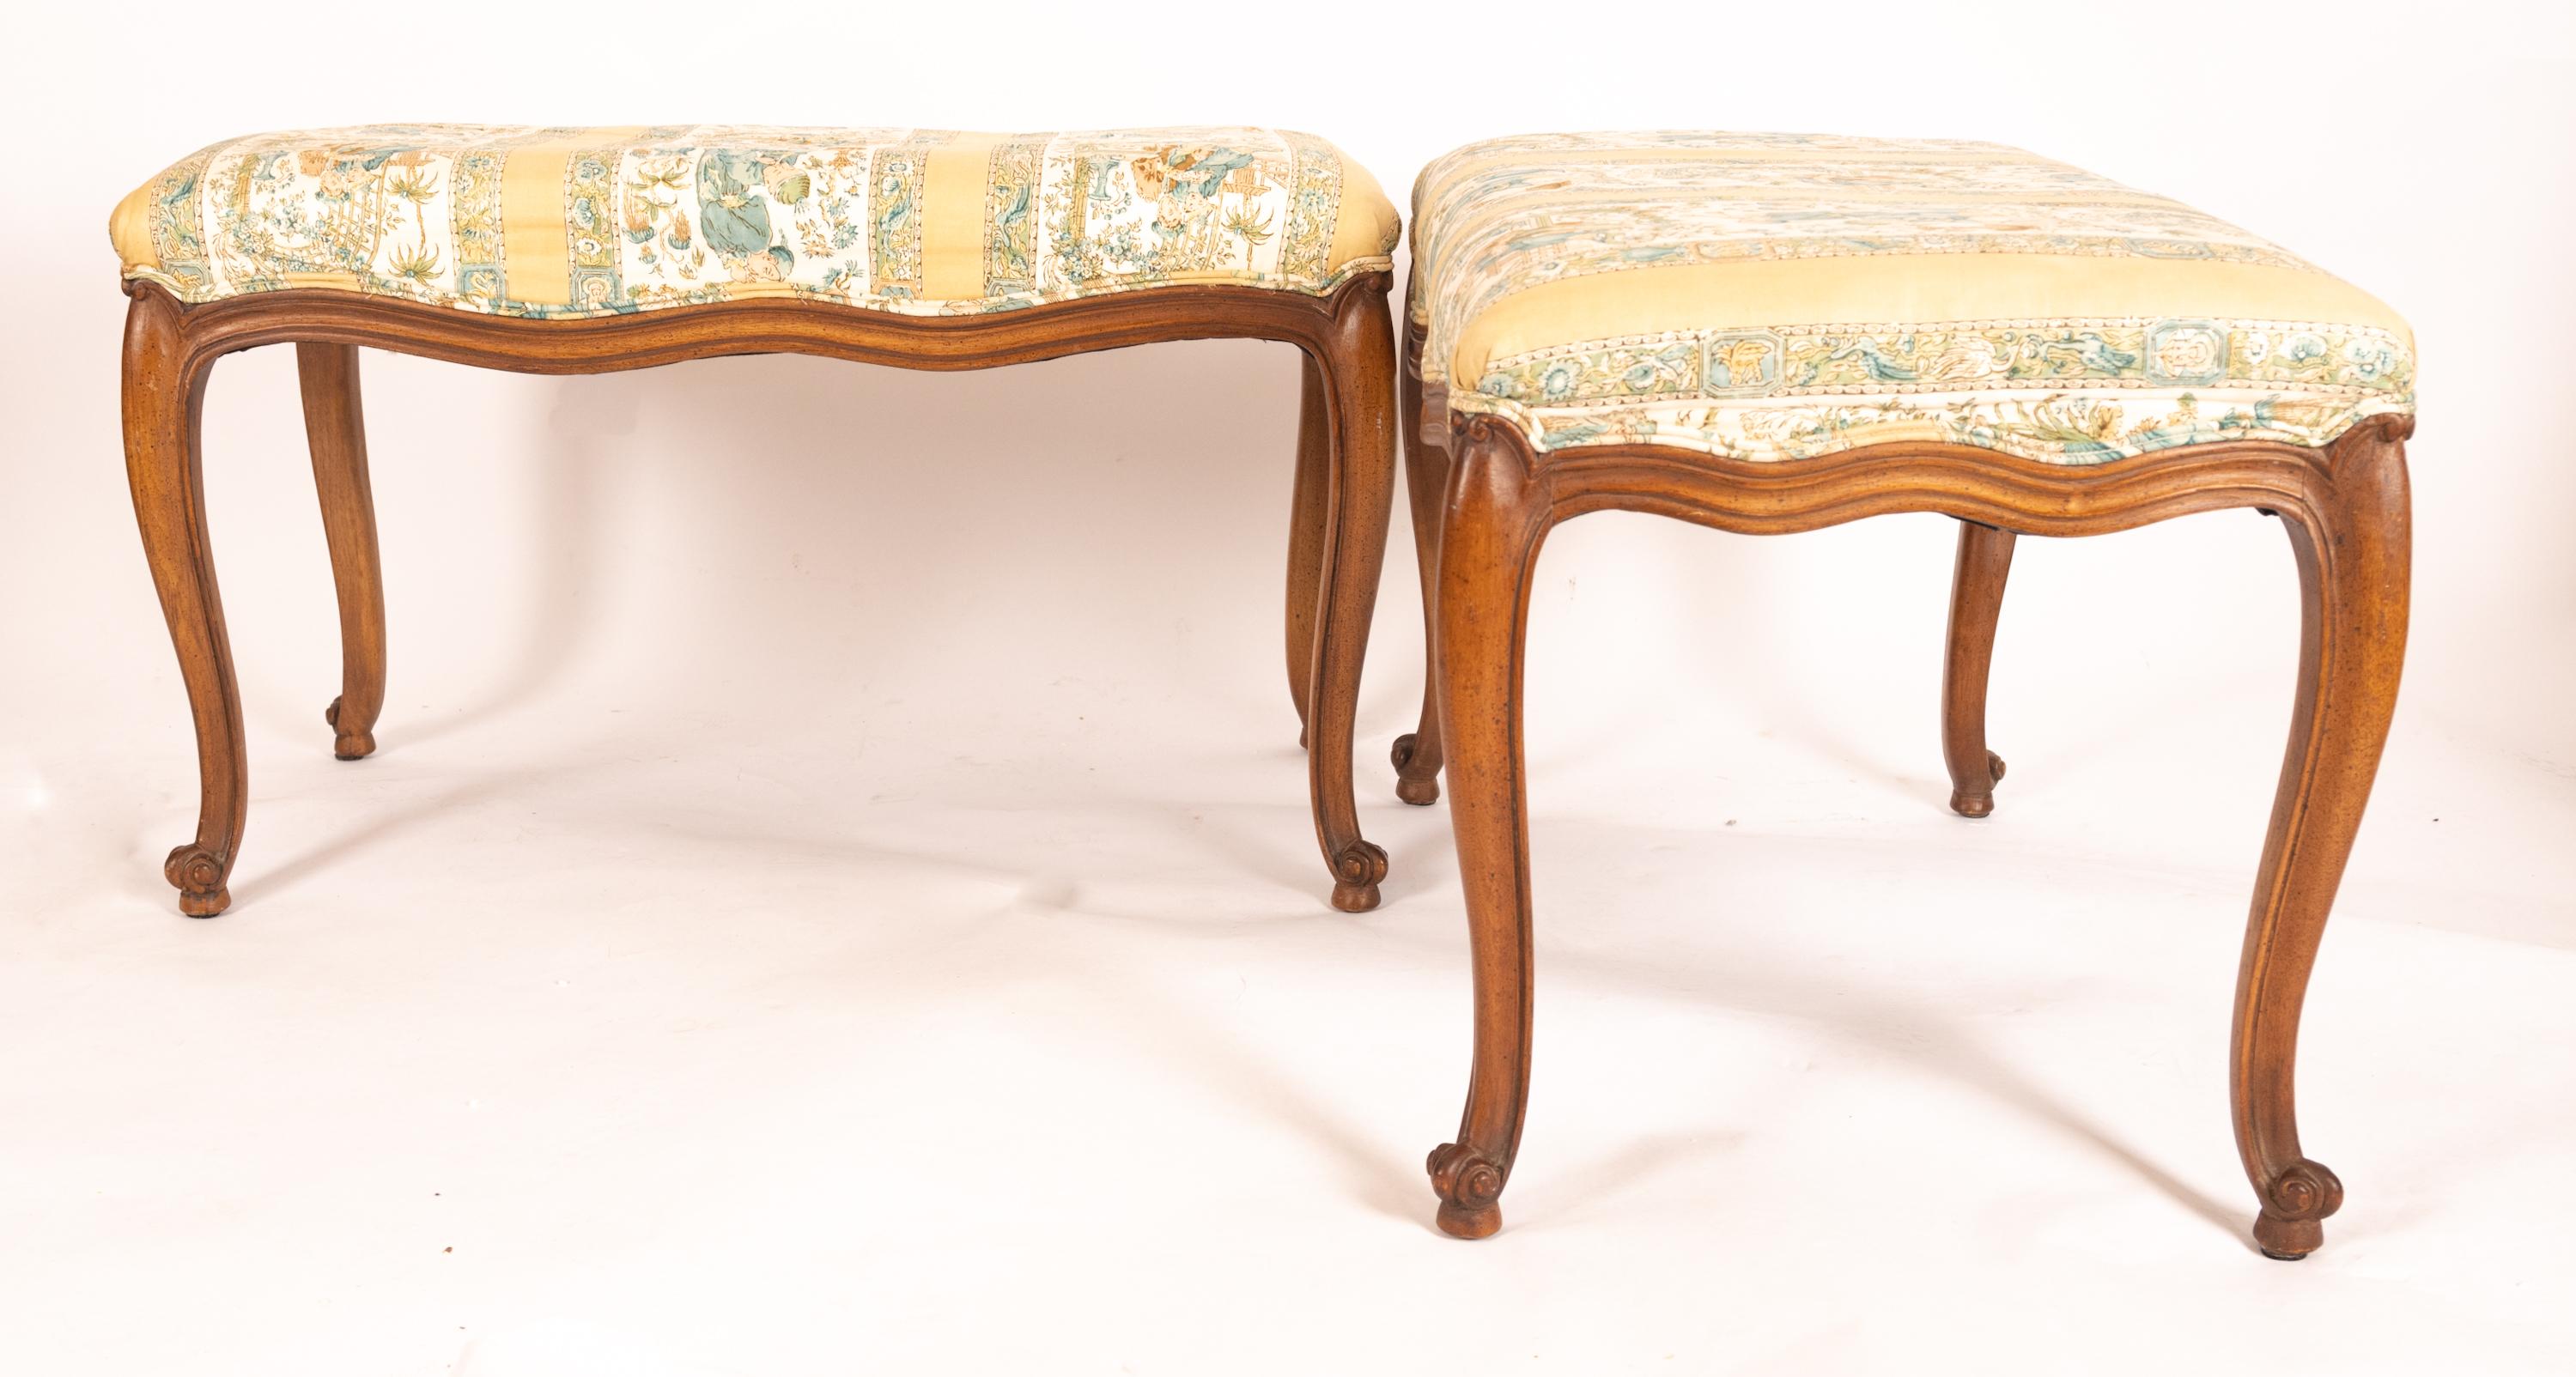 Pair of 19th Century Louis XVth-Style Fruitwood Benches with Upholstered Seats In Good Condition For Sale In New York, NY